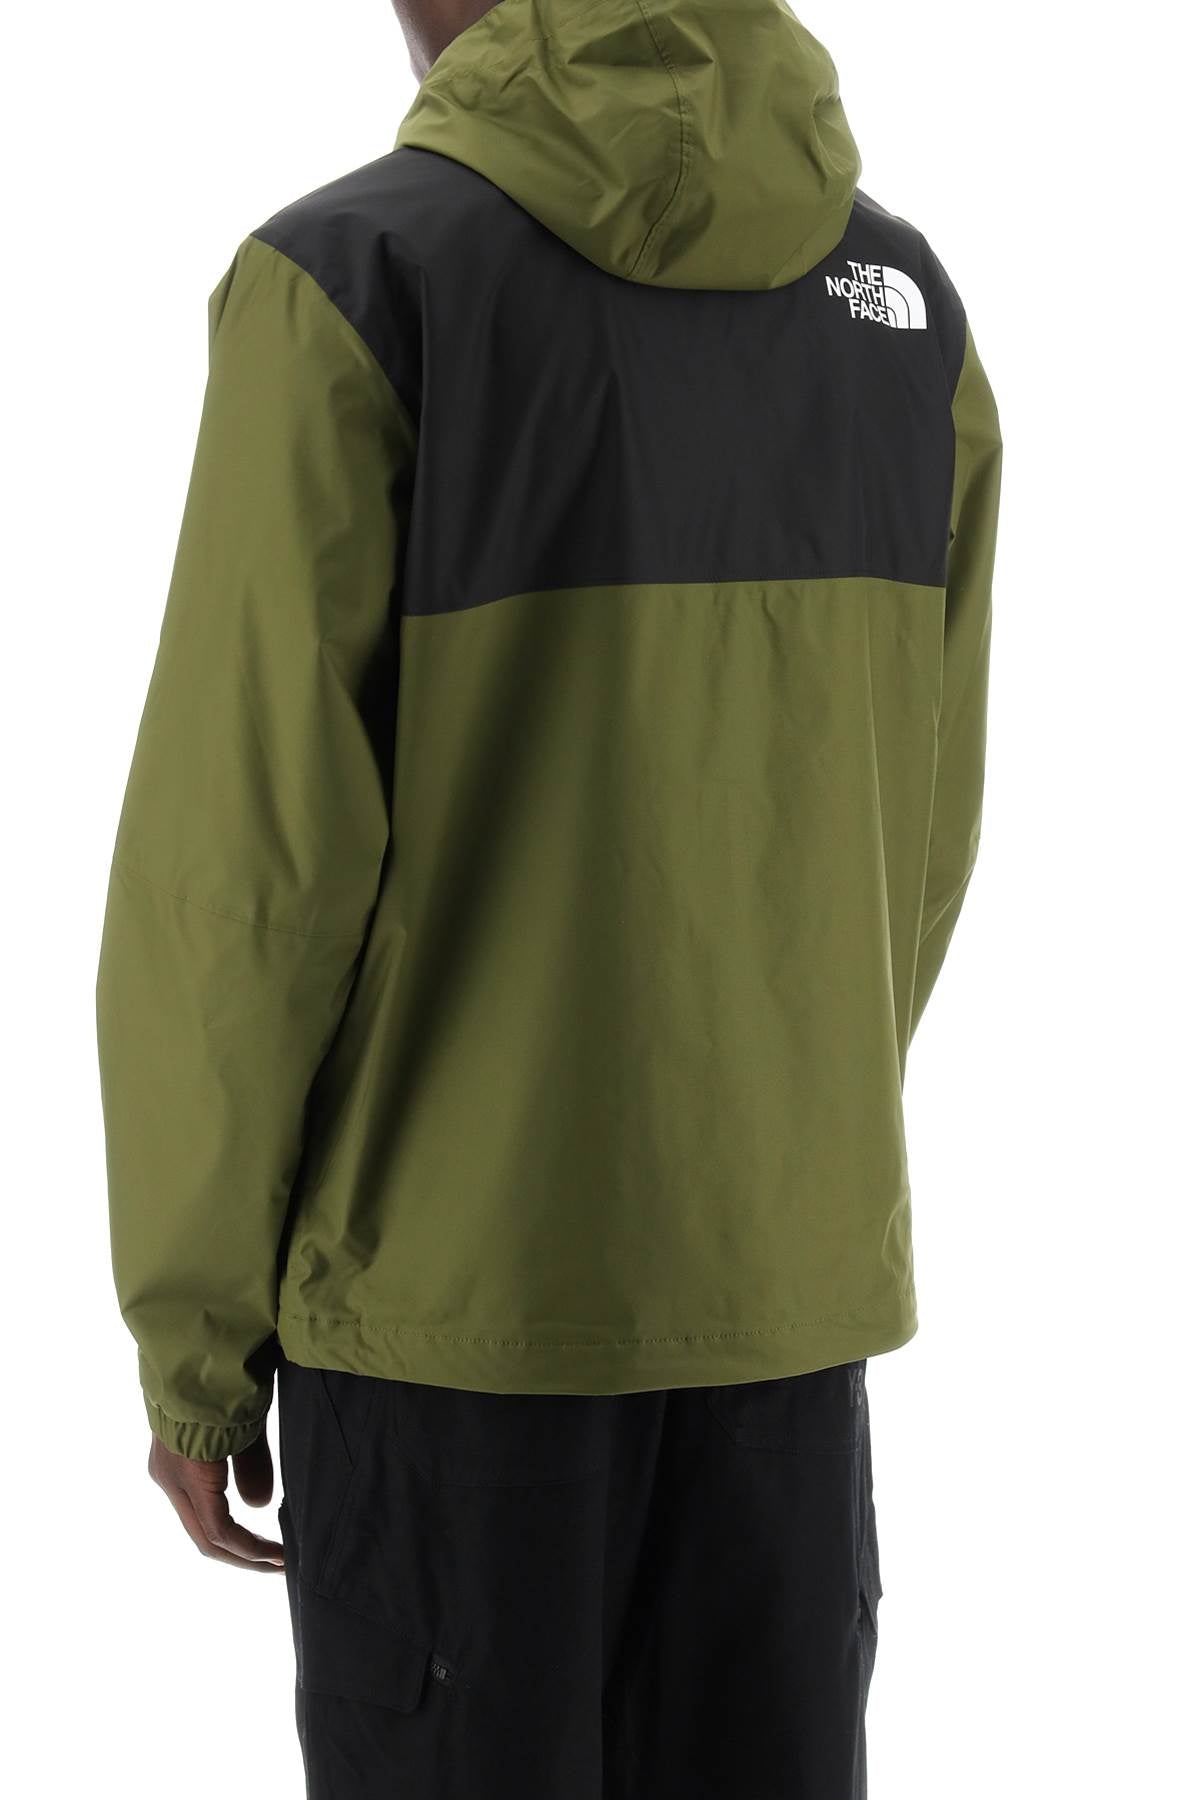 The north face new mountain q windbreaker jacket-2